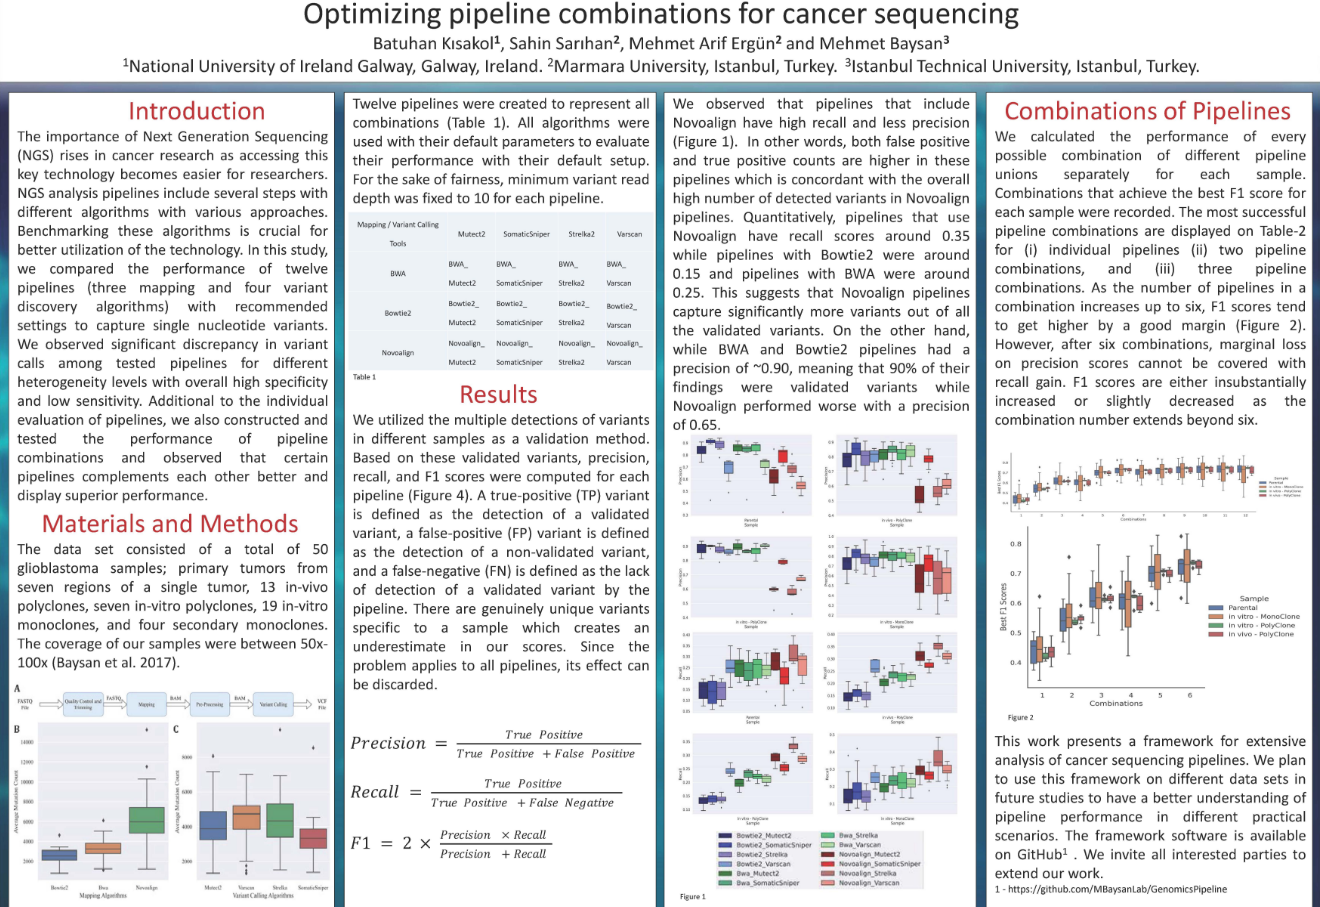 Optimizing pipeline combinations for cancer sequencing